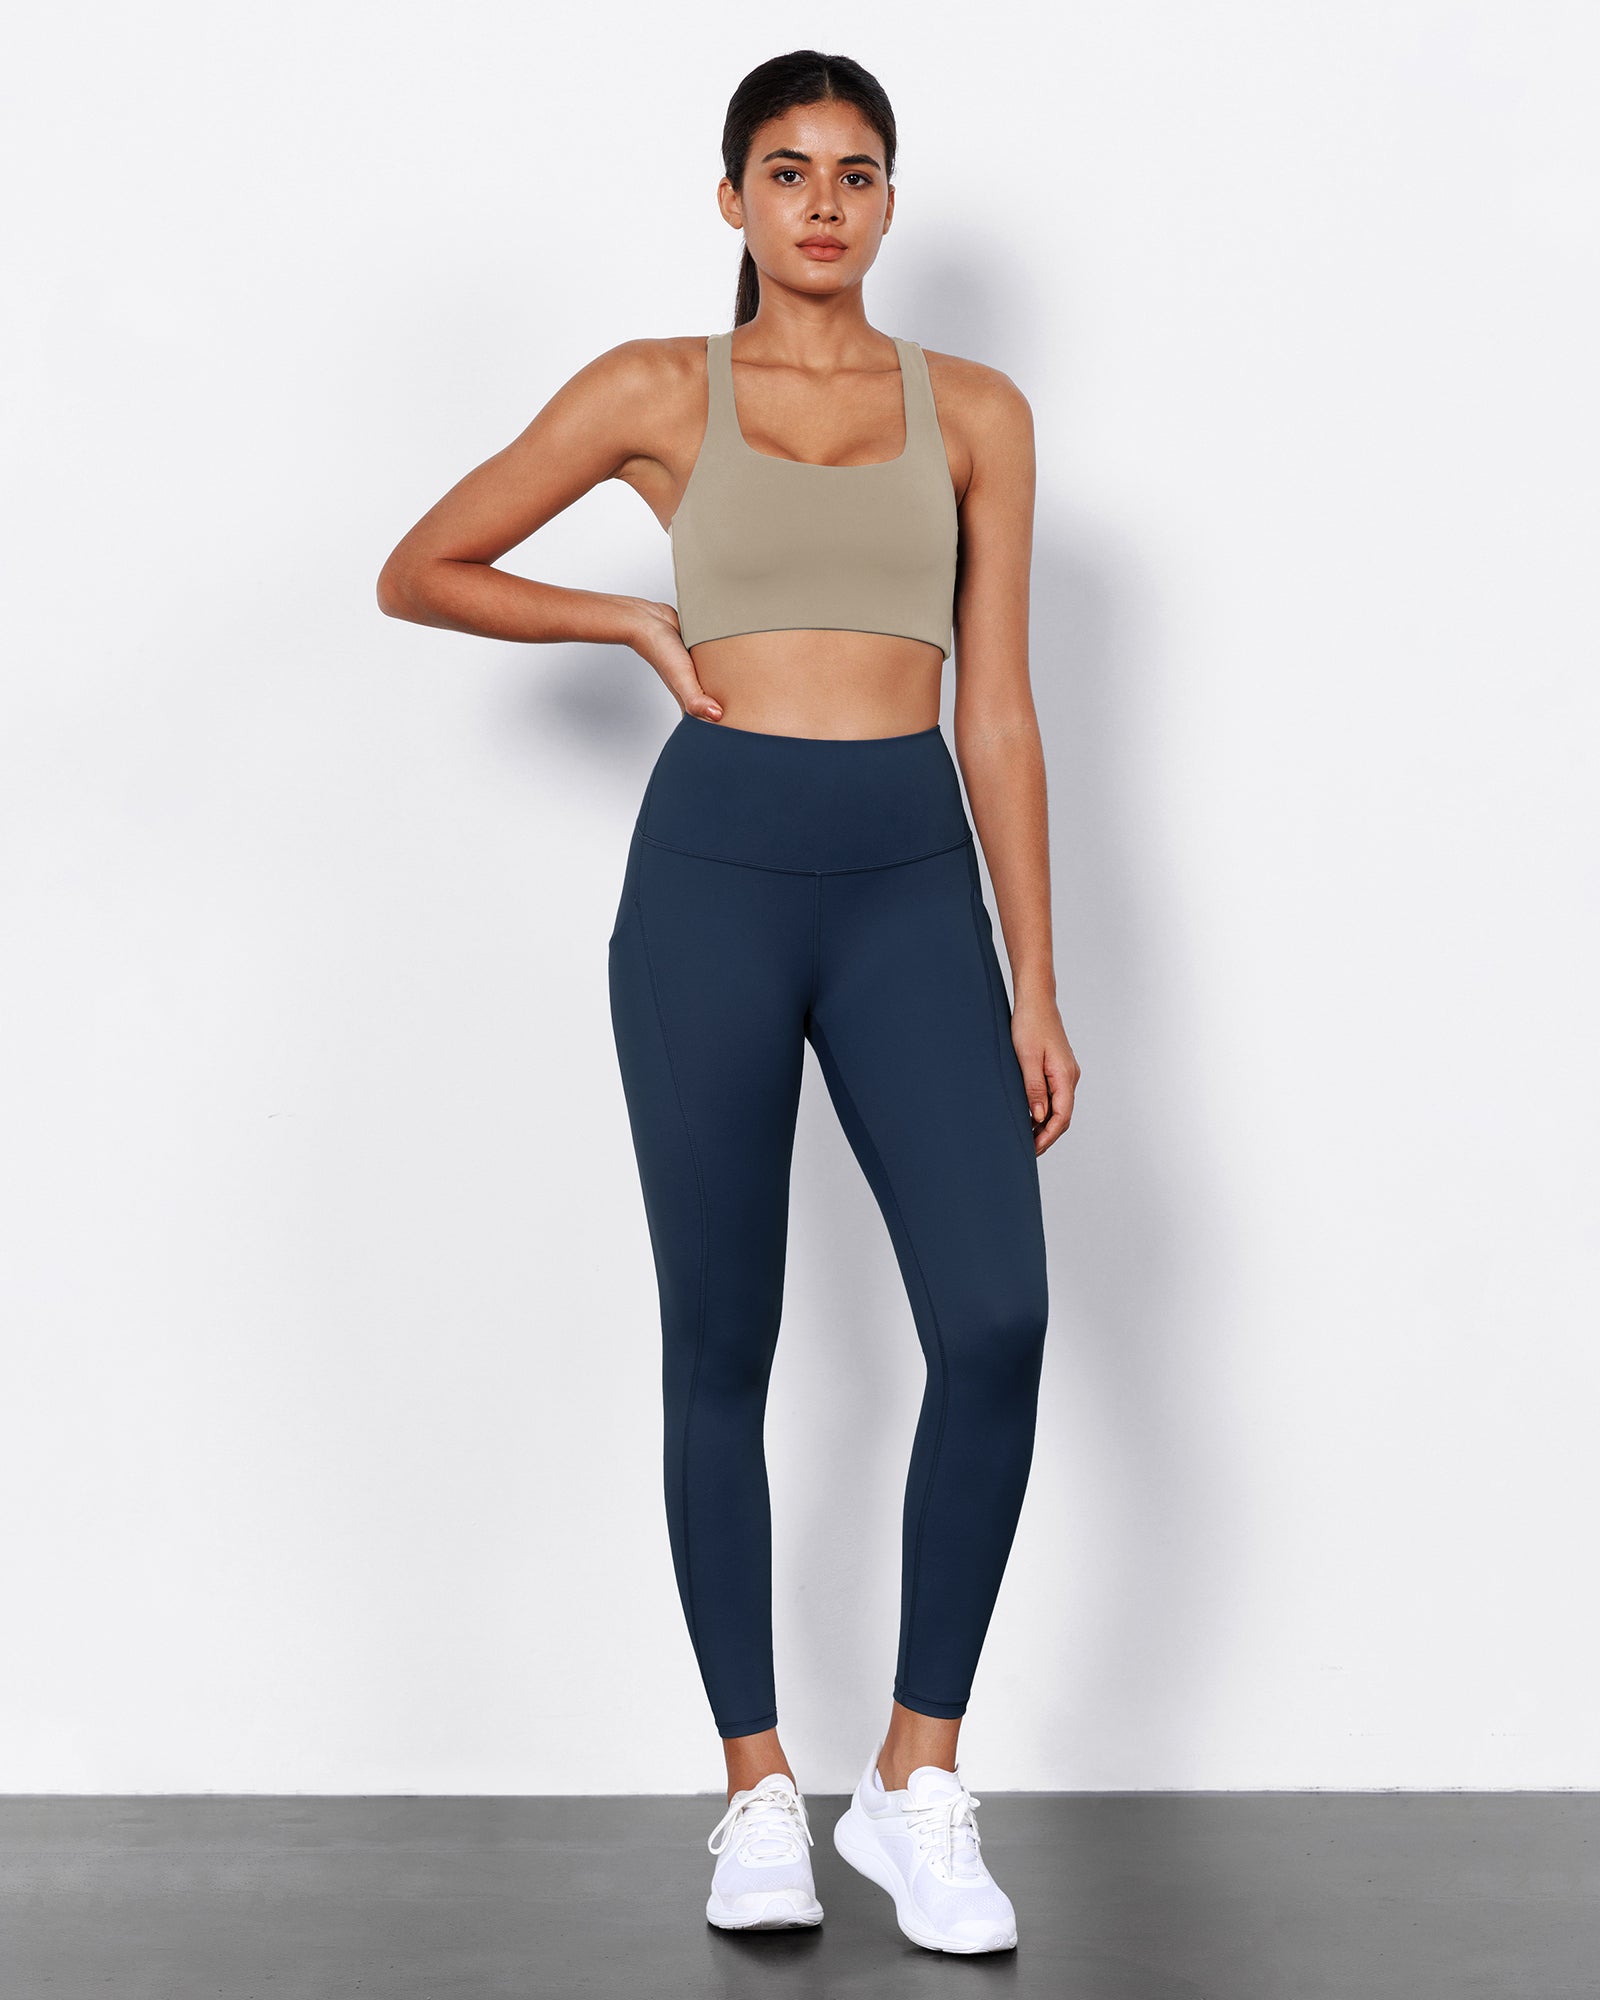 2-Pack 7/8 High Waist Workout Leggings with Pockets Black+Navy - ododos